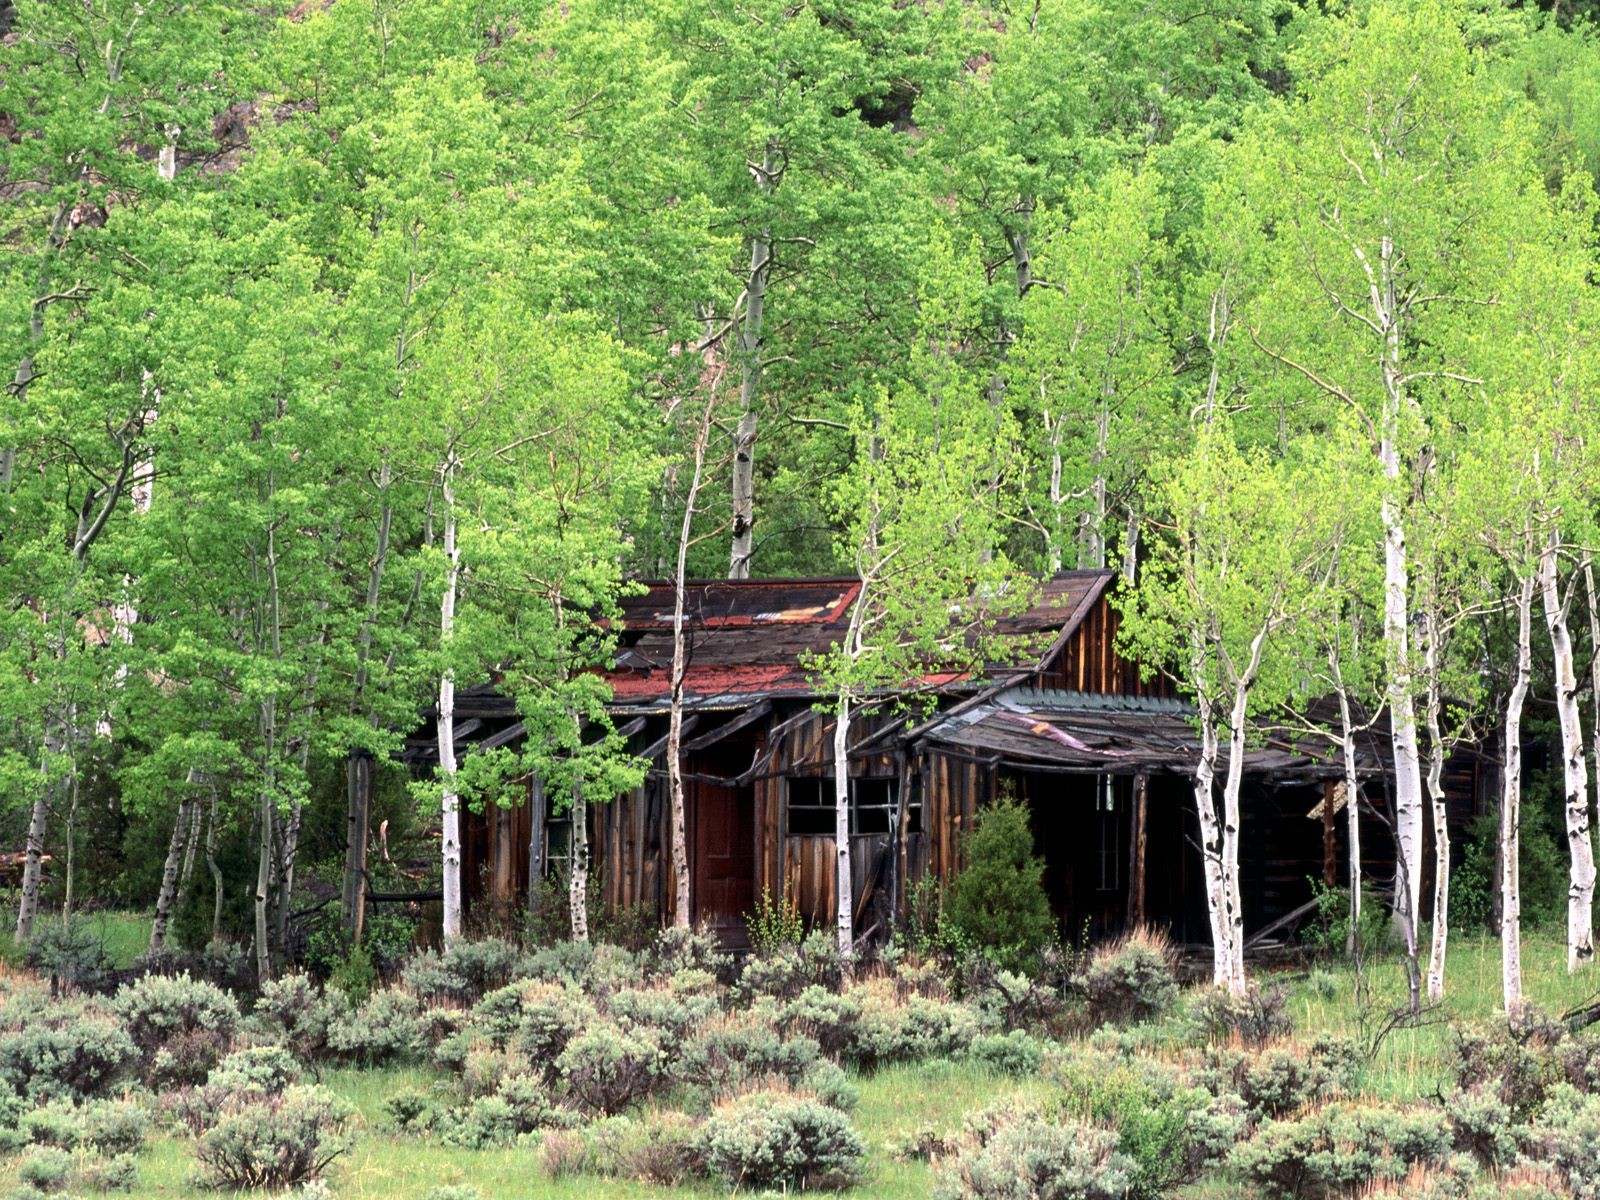 General 1600x1200 cottage trees birch abandoned cabin forest shrubbery green shrubs outdoors